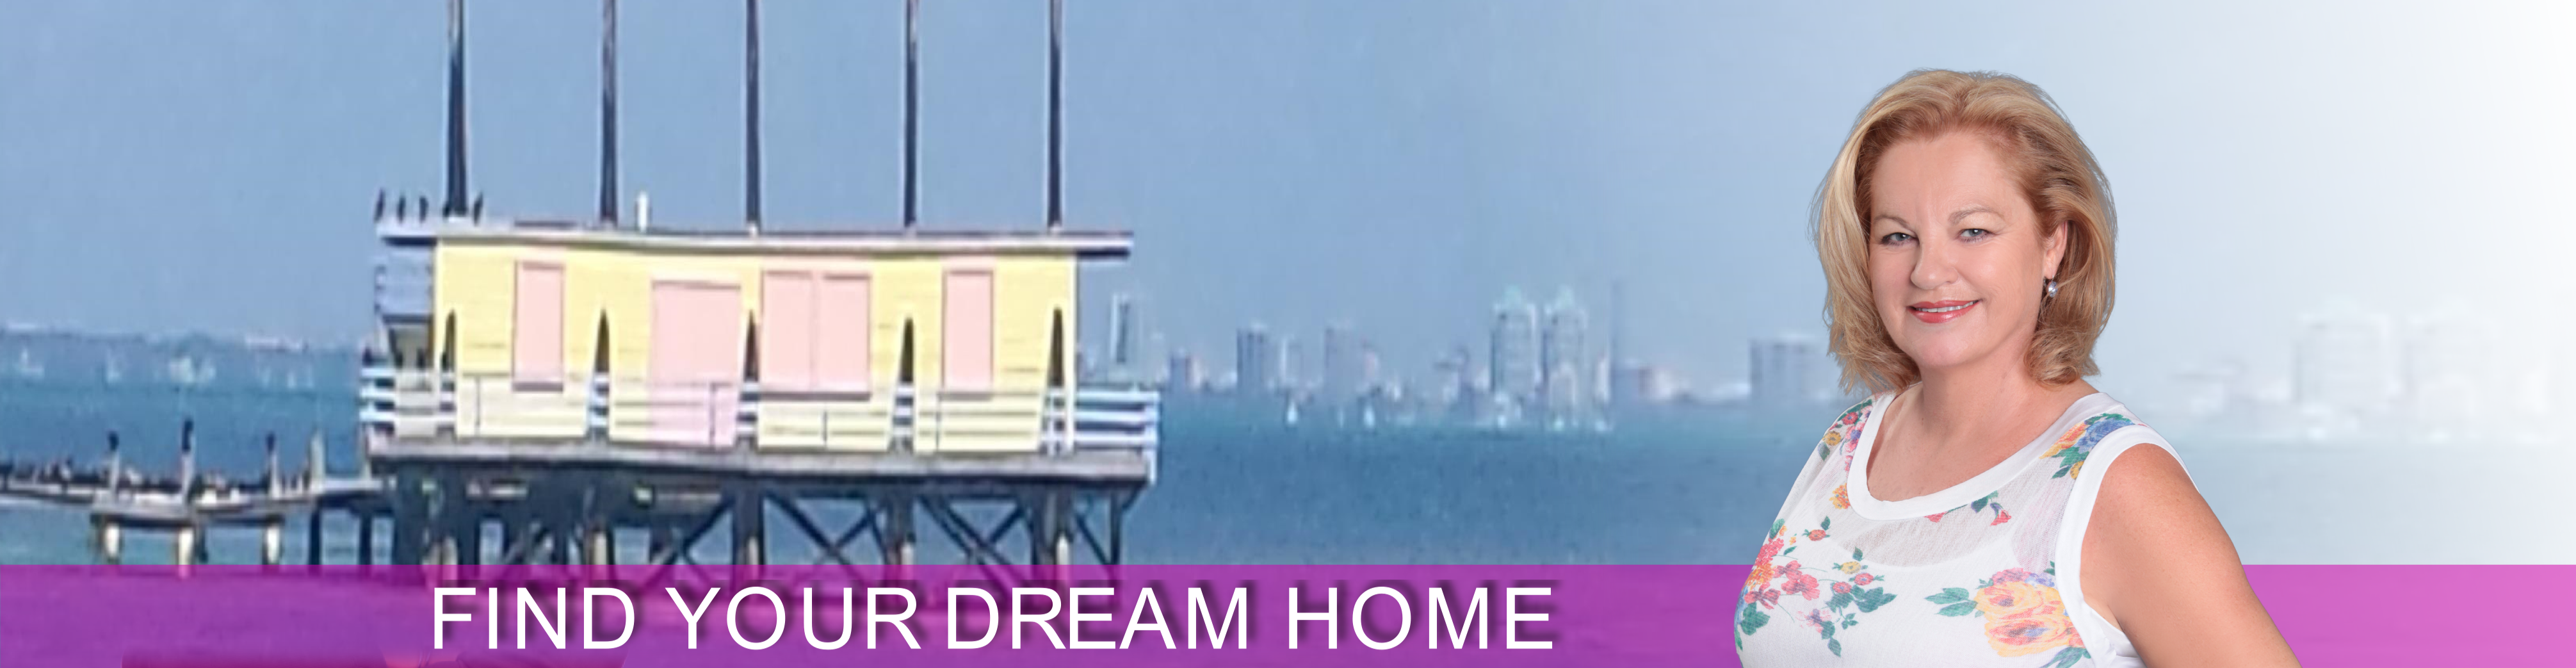 Marie Josee - KW realty - find your dream home - miami homes